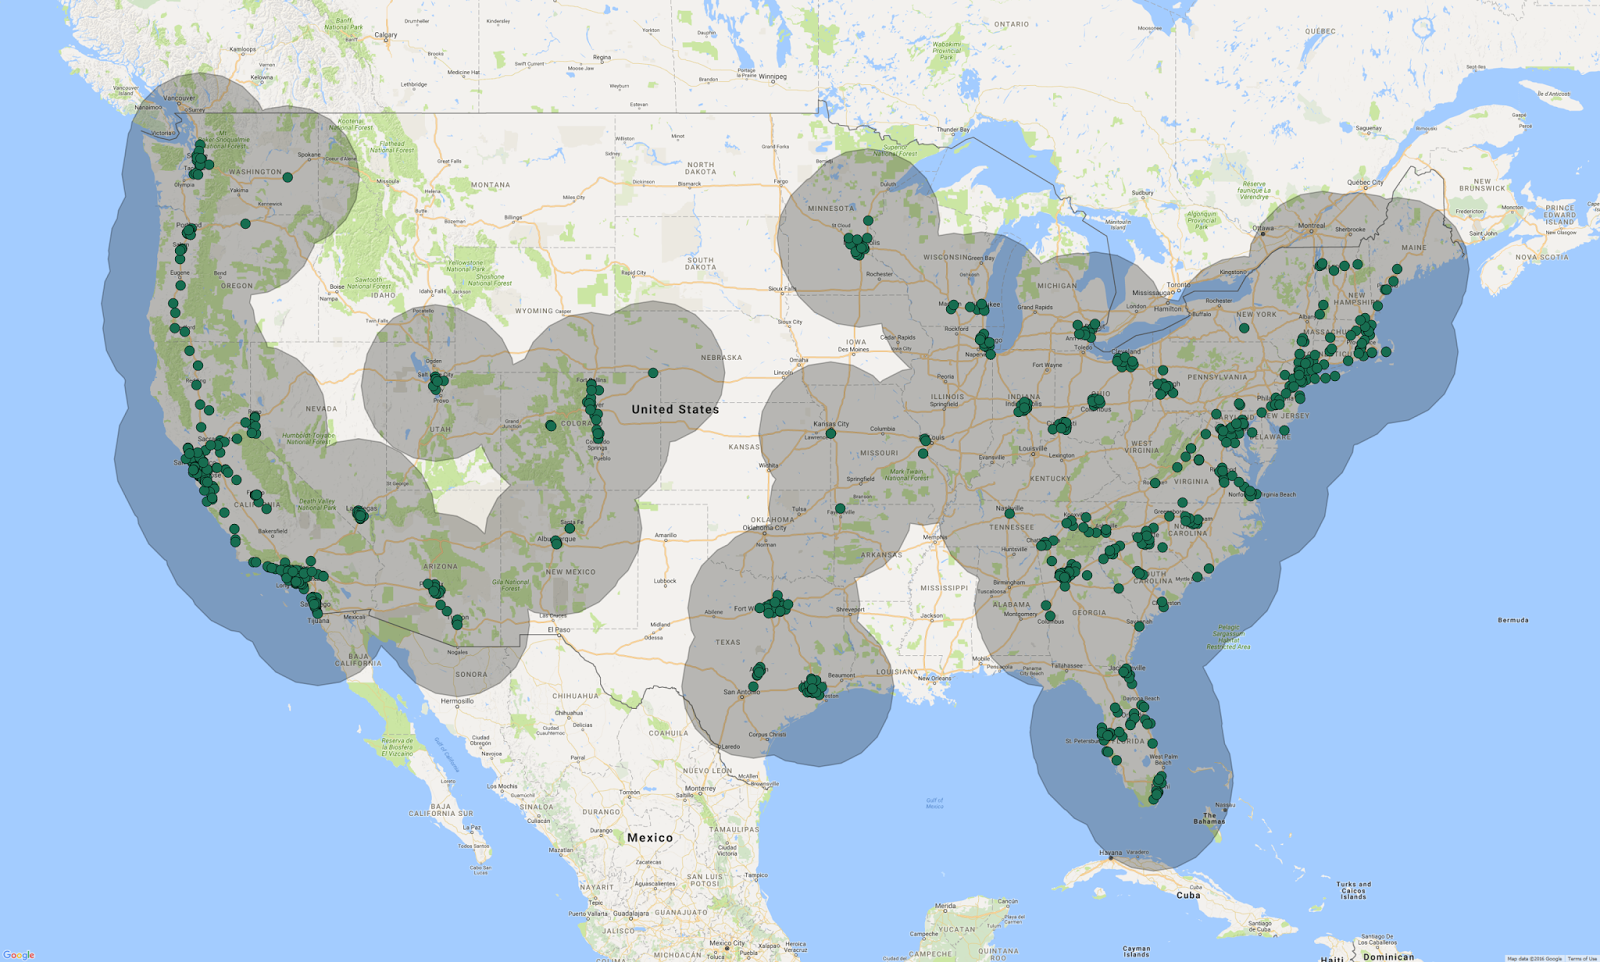 dc fast charging stations map Ccs Dc Fast Charger Coverage Map Chevrolet Bolt Ev Forum dc fast charging stations map